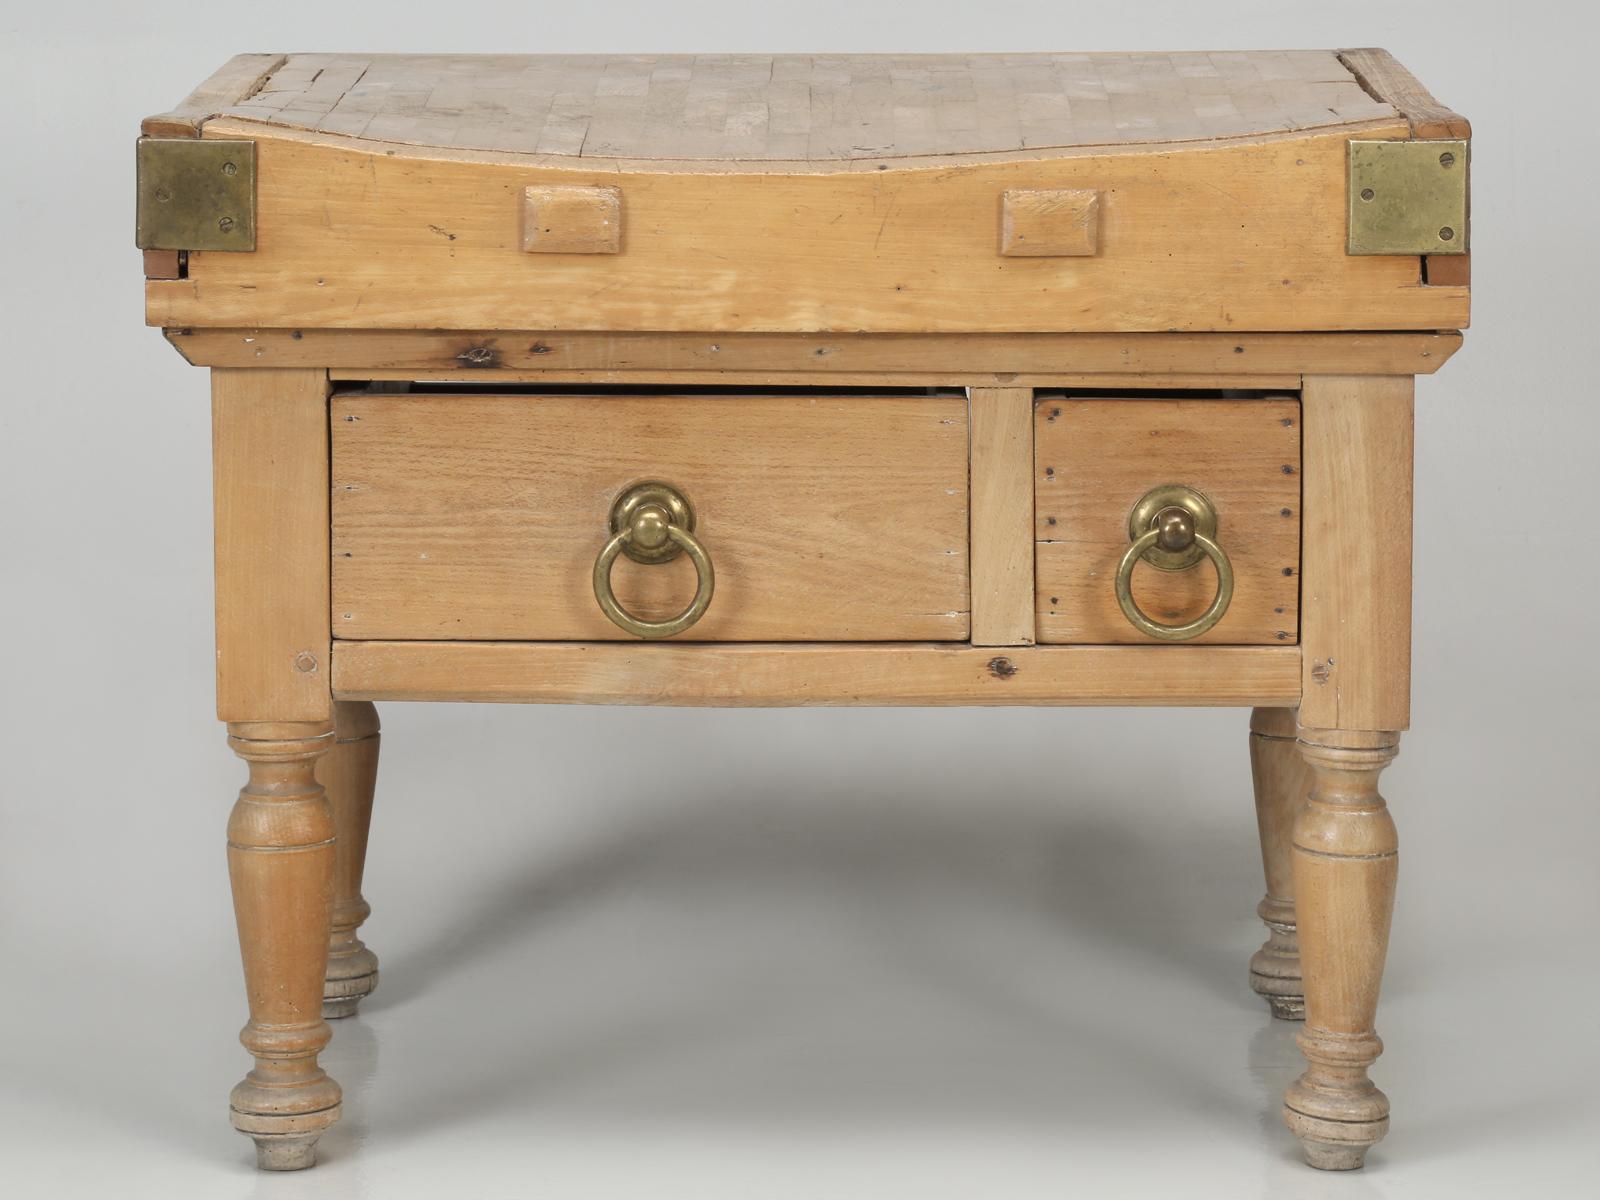 American antique butcher block was constructed from solid blocks of maple and still is adorned with its original solid brass hardware, dovetailed top and wooden-peg constructed legs. This American antique butcher block has been in the owner's